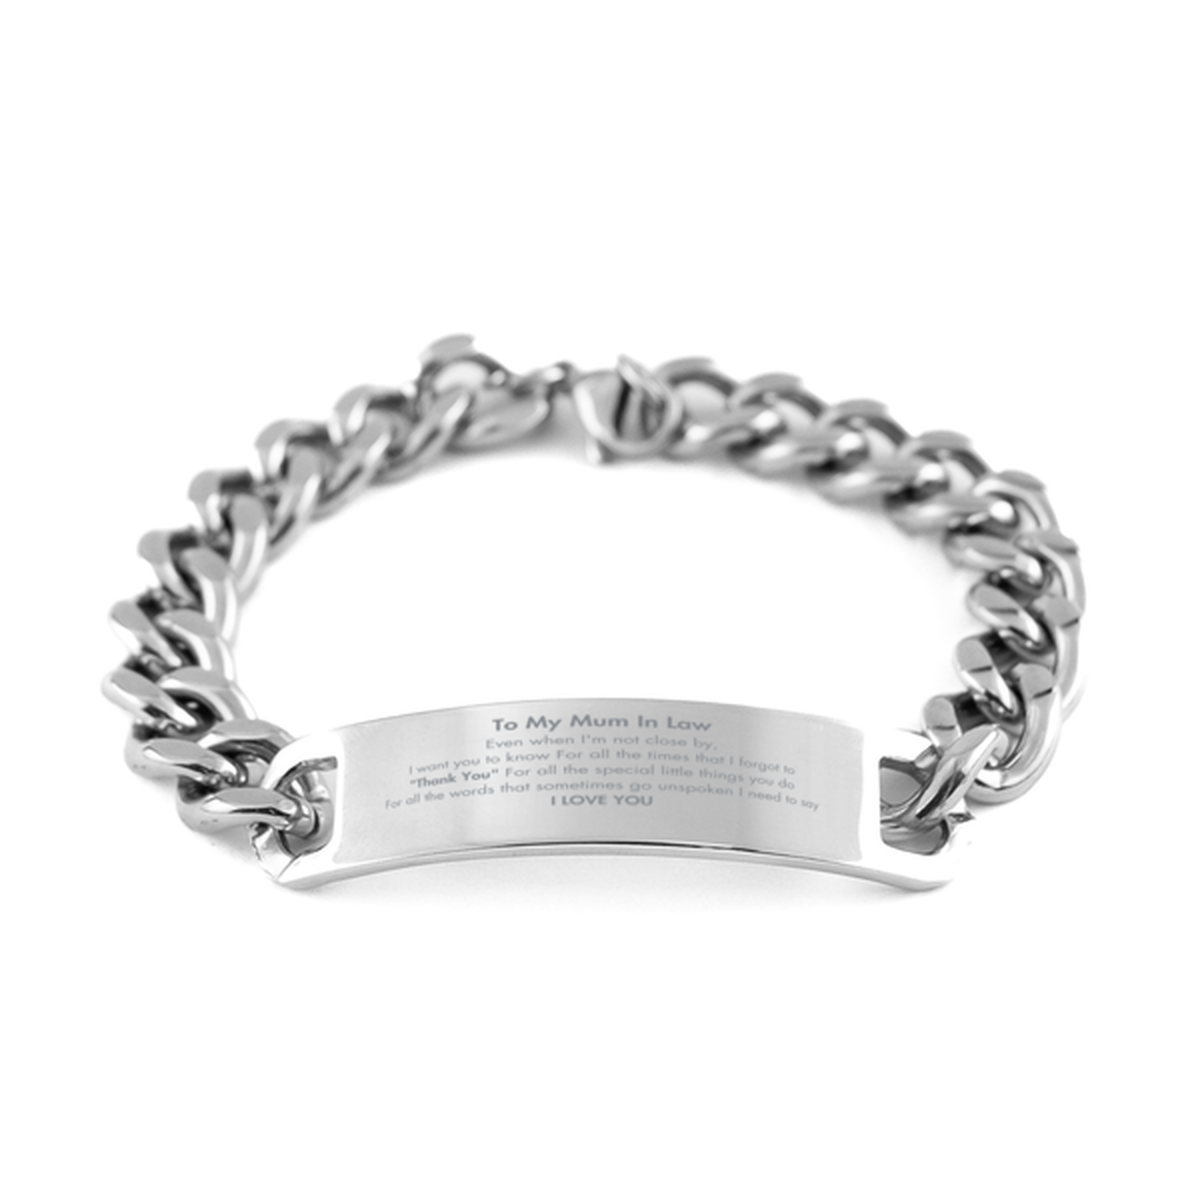 Thank You Gifts for Mum In Law , Keepsake Cuban Chain Stainless Steel Bracelet Gifts for Mum In Law  Birthday Mother's day Father's Day Mum In Law  For all the words That sometimes go unspoken I need to say I LOVE YOU